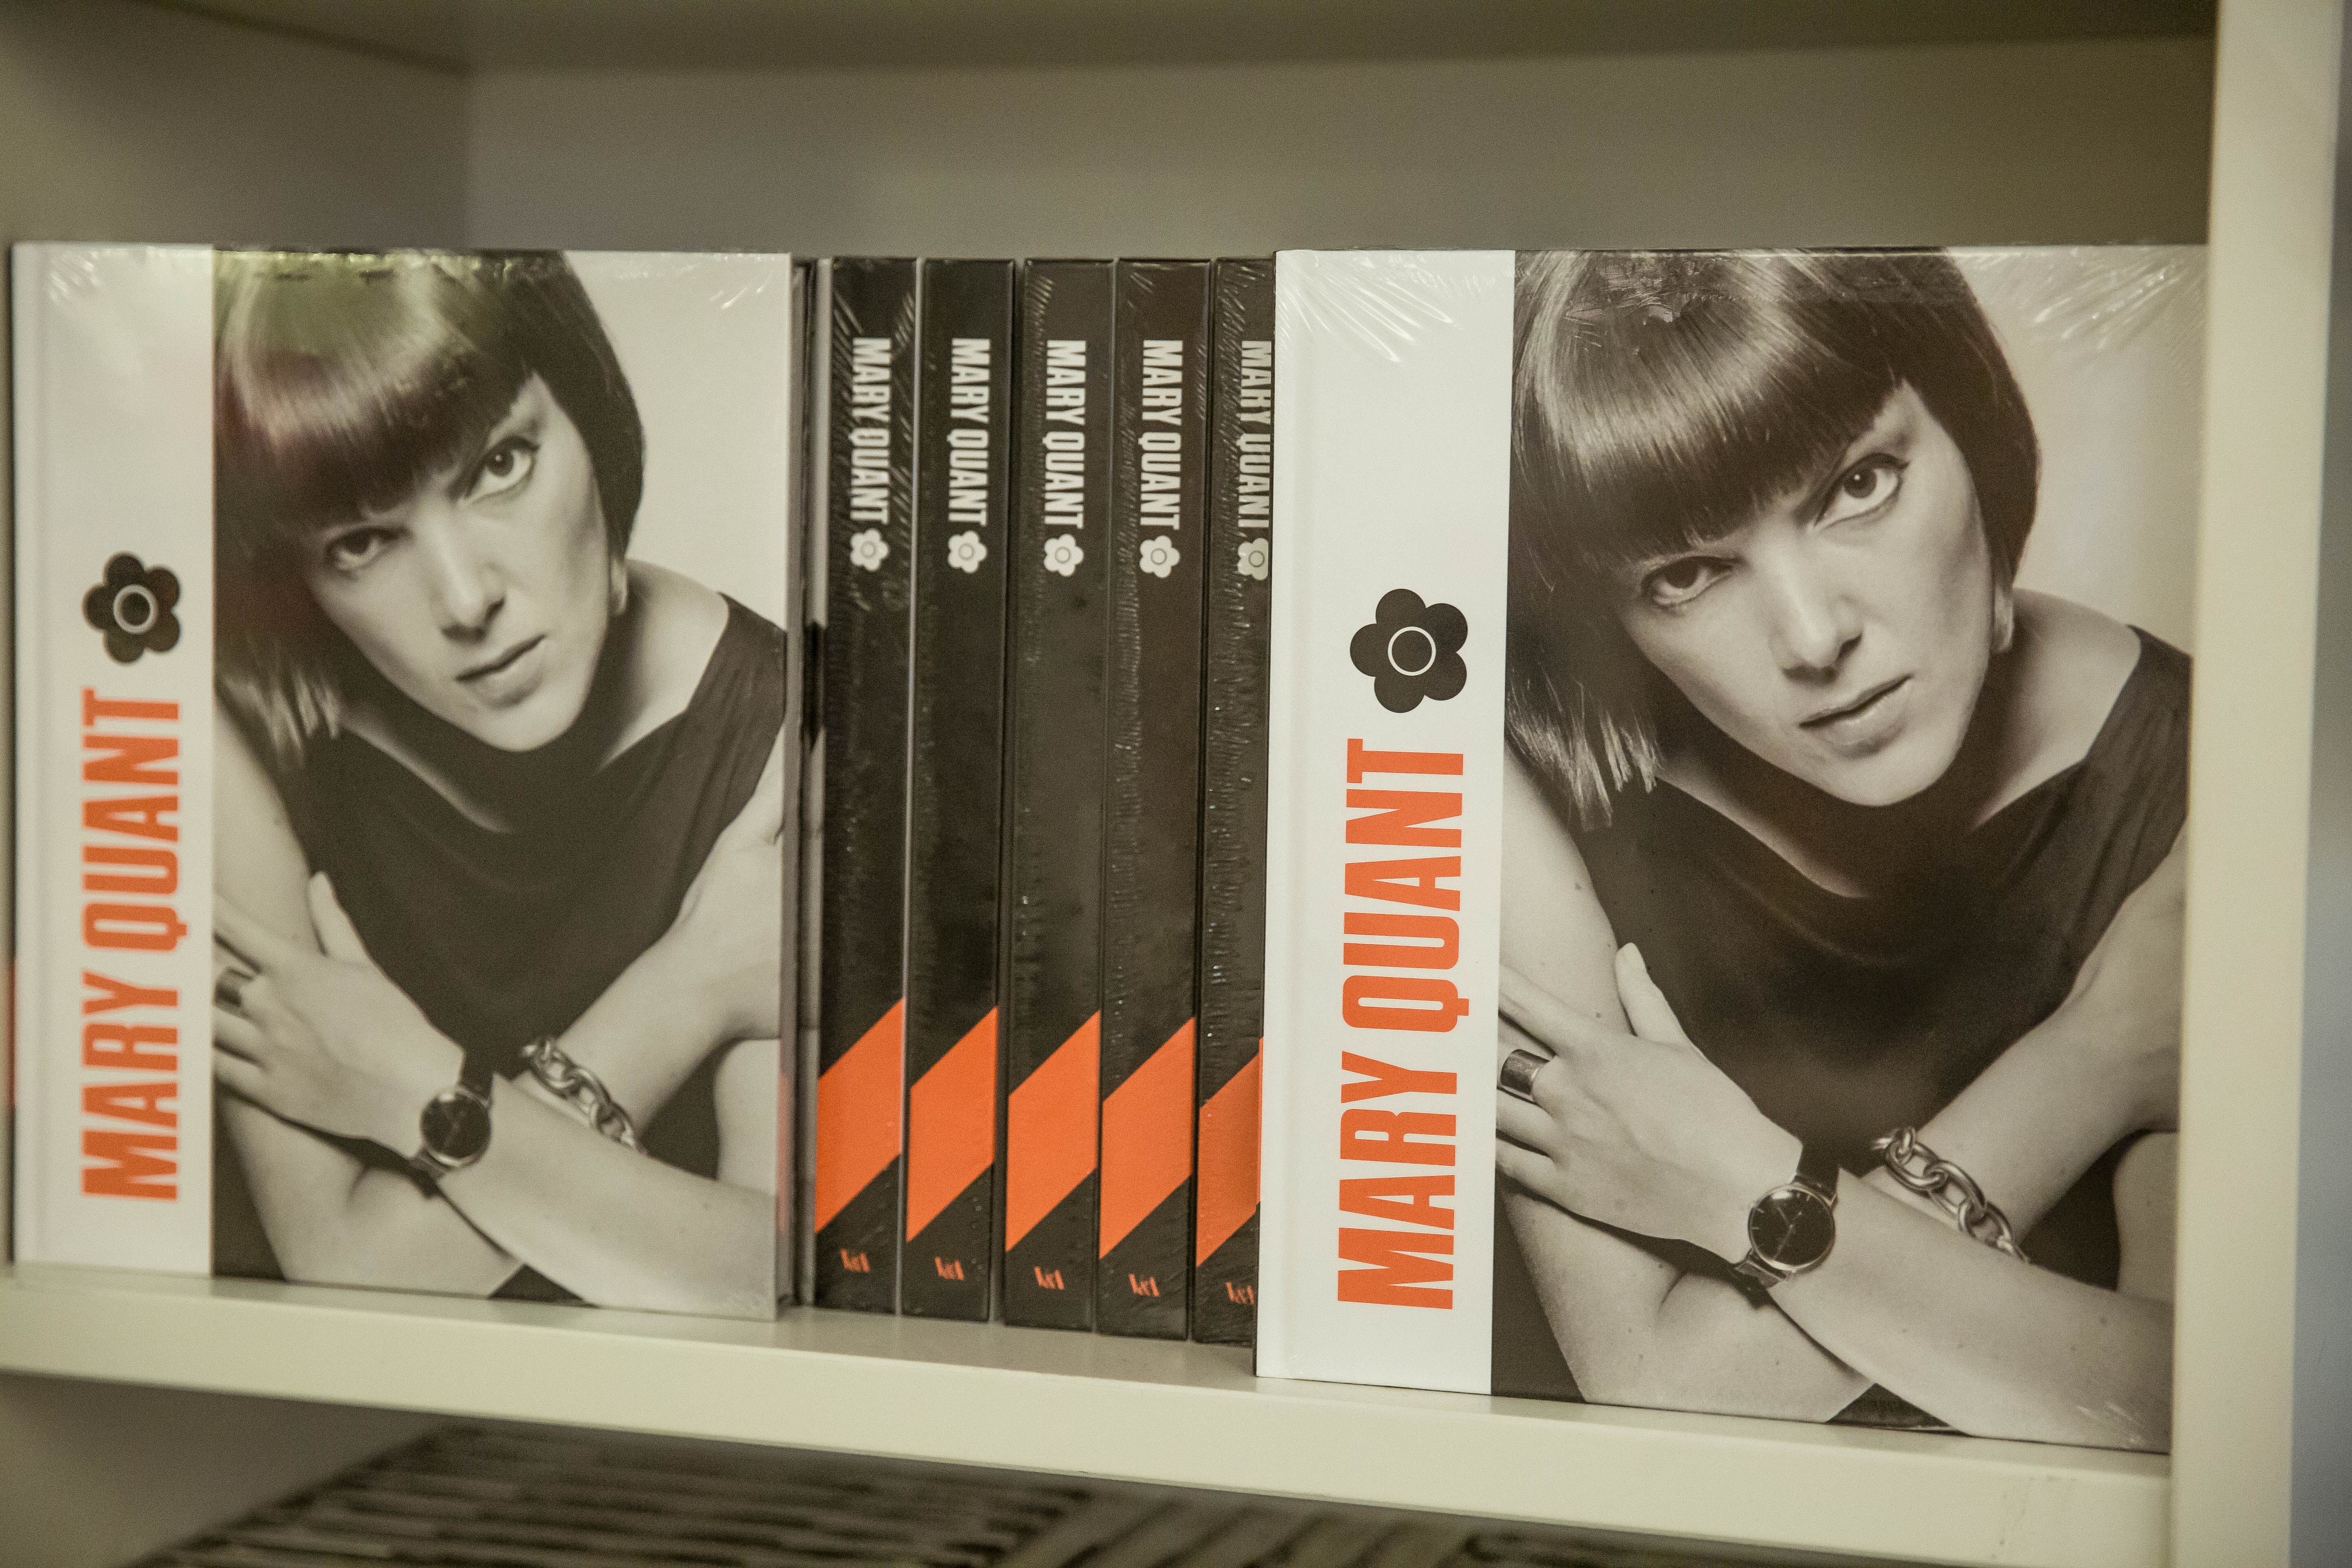 London events photographer, Mary Quant at the V&A